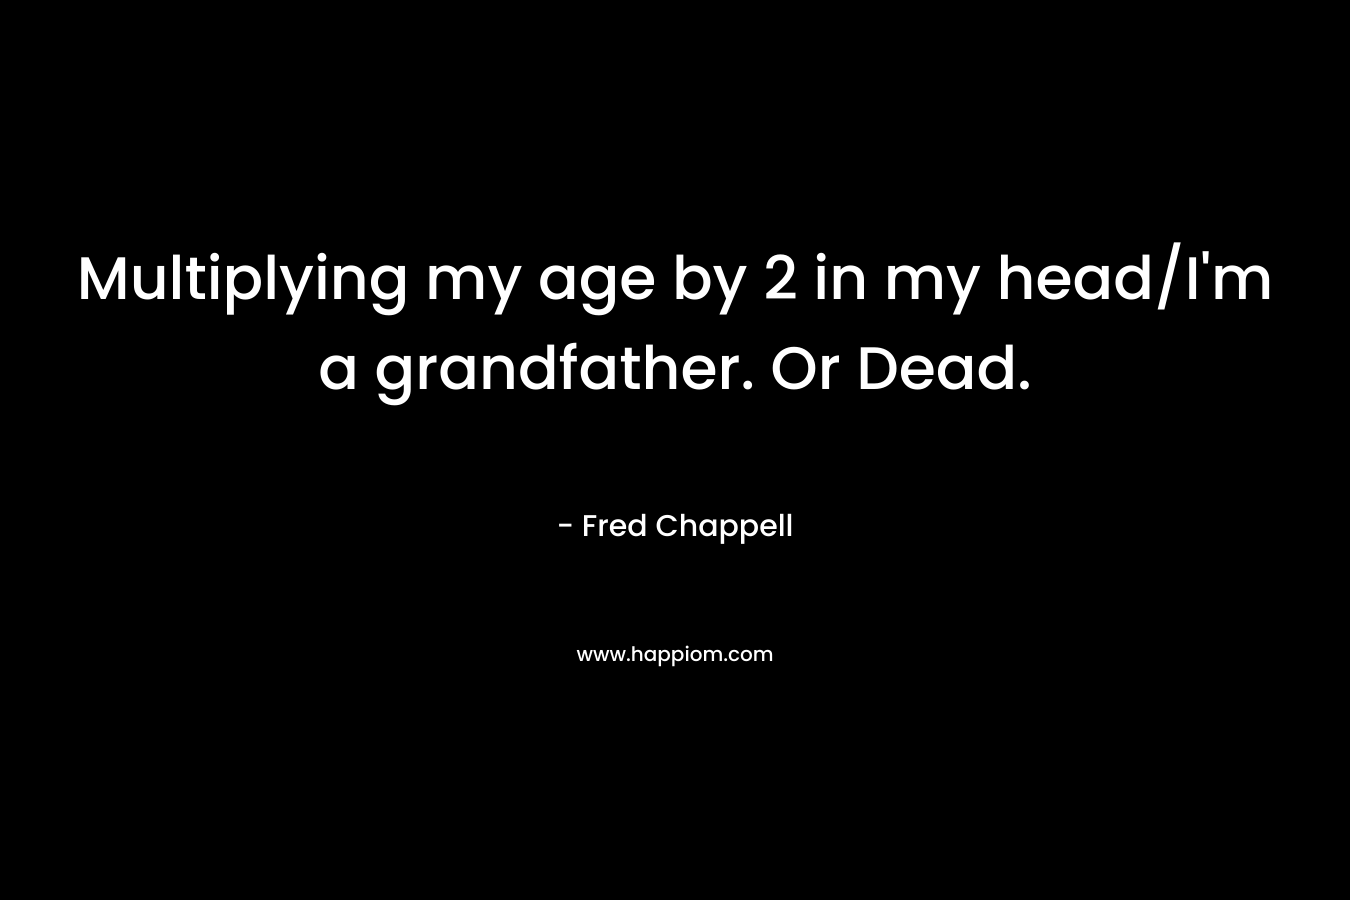 Multiplying my age by 2 in my head/I'm a grandfather. Or Dead.